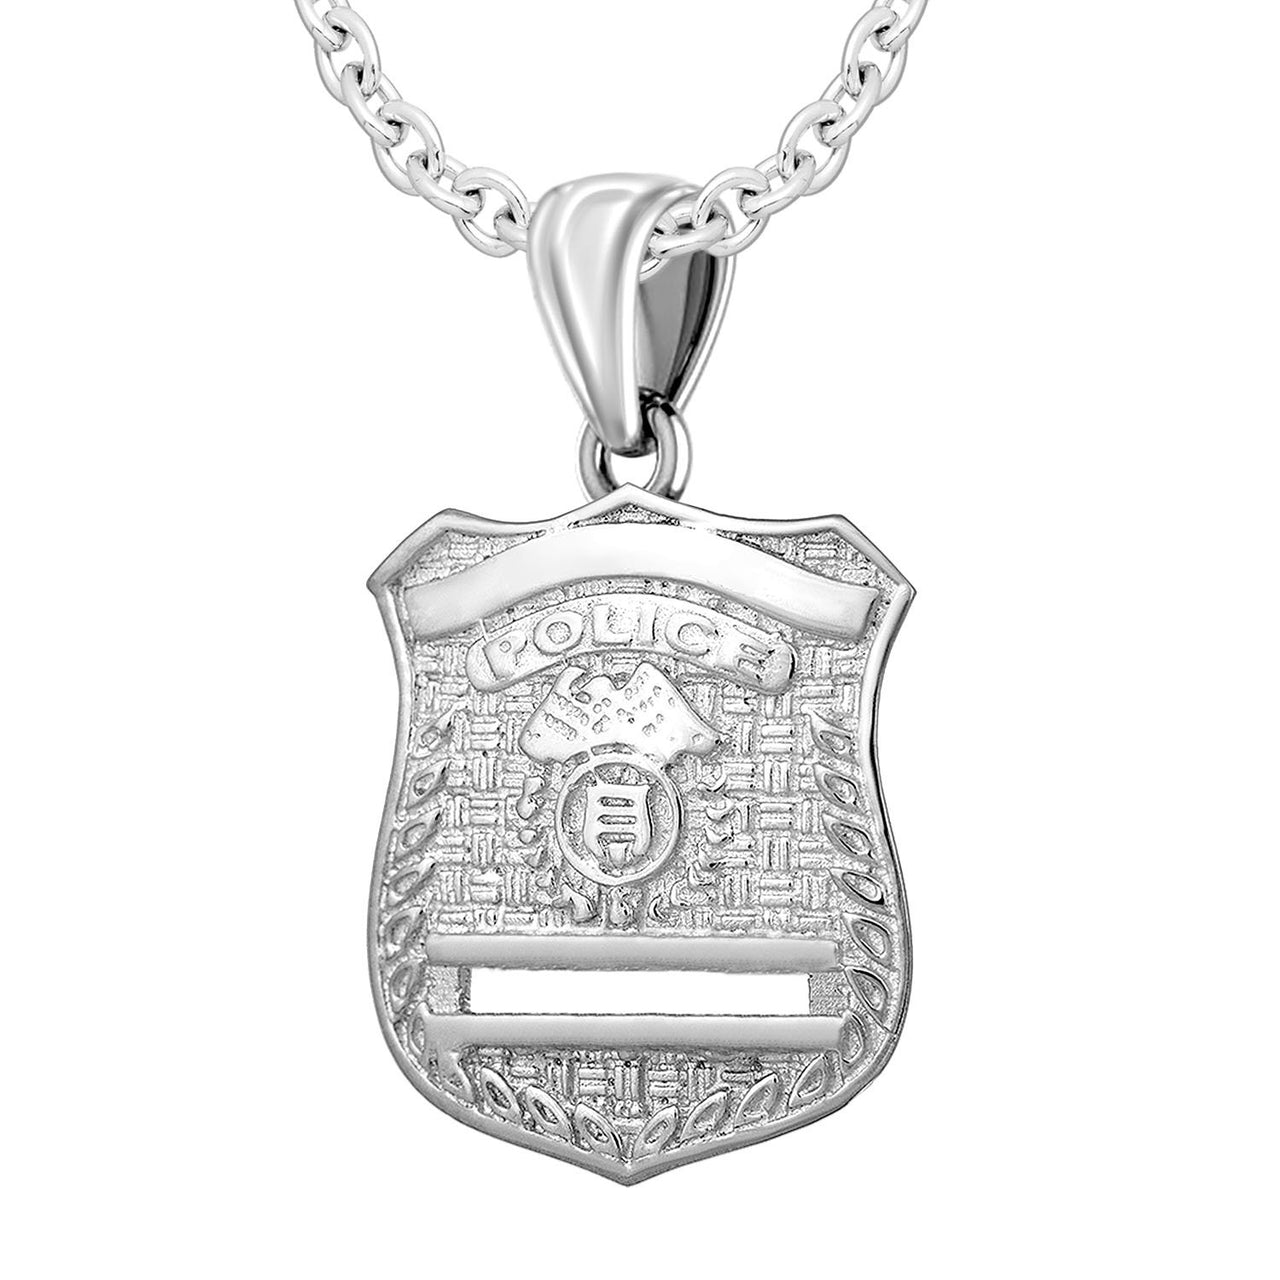 Police Badge Necklace In Silver - 2.5mm Cable Chain